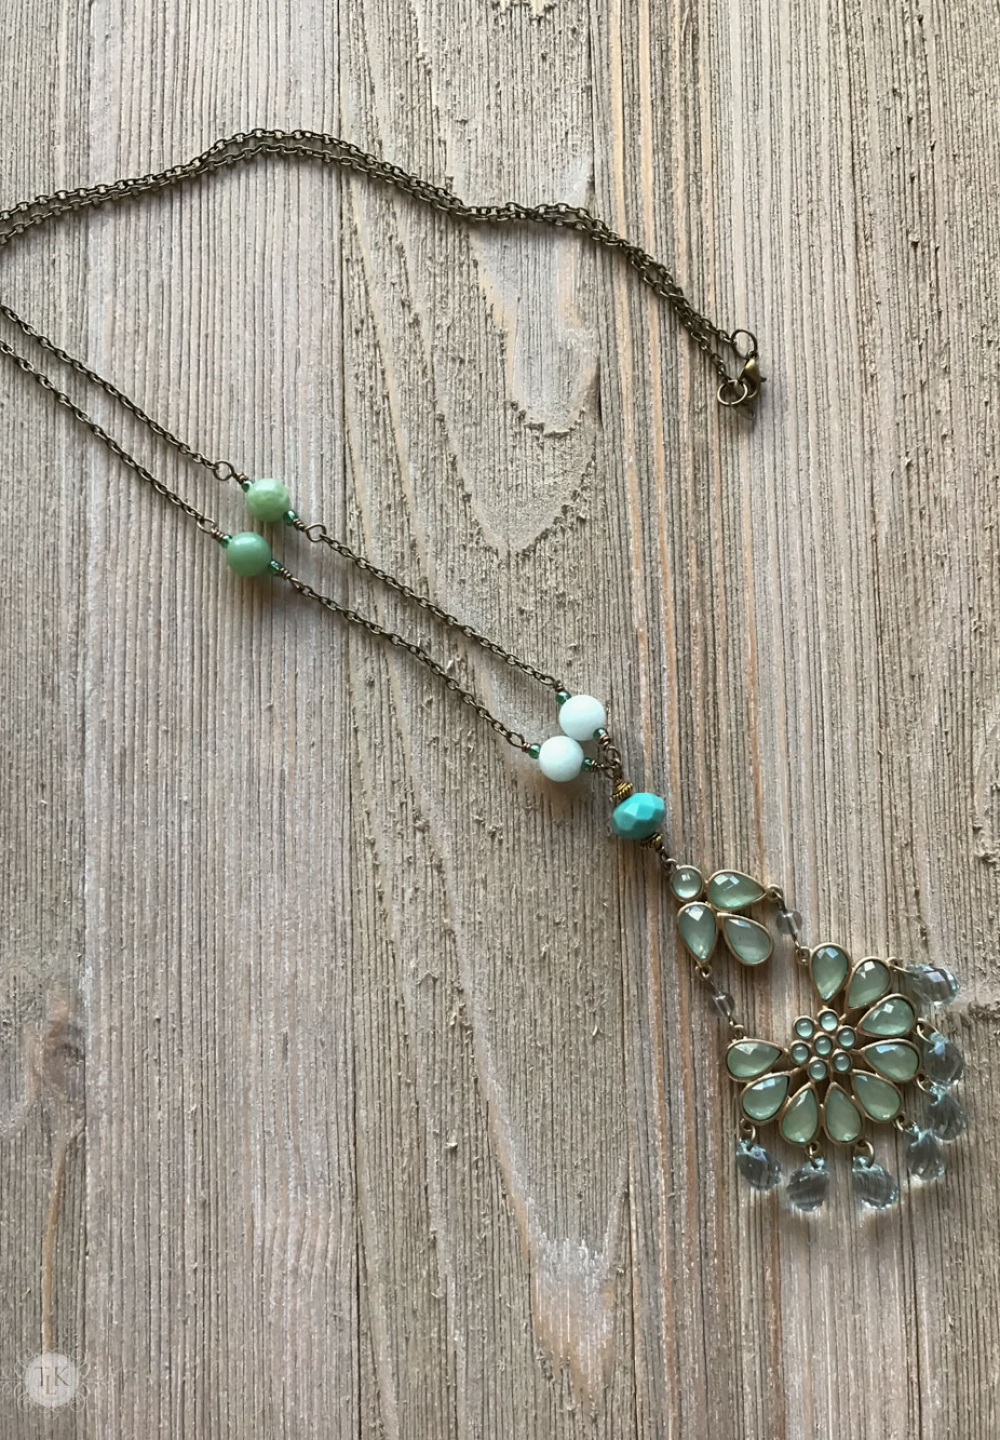 THREE LITTLE KITTENS | 3708n Amazonite and Costume Jewelry Pendant Necklace